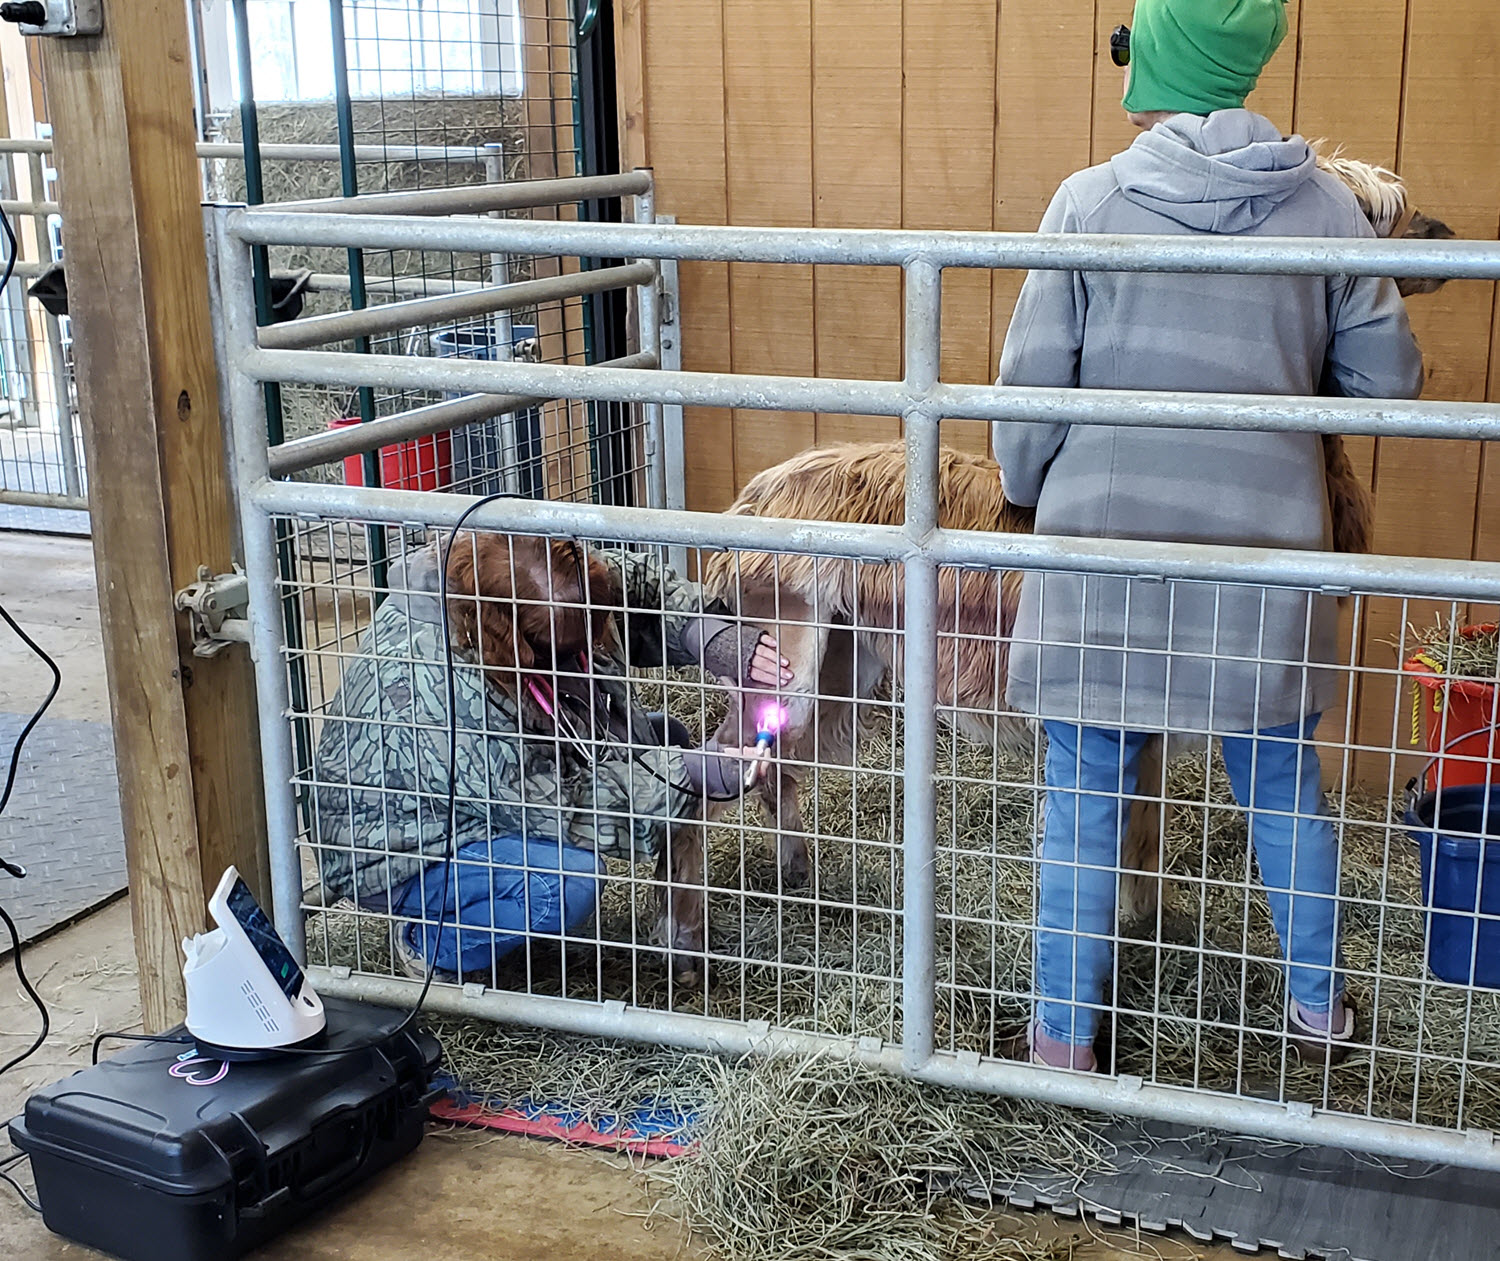 Laser Therapy on an Alpaca